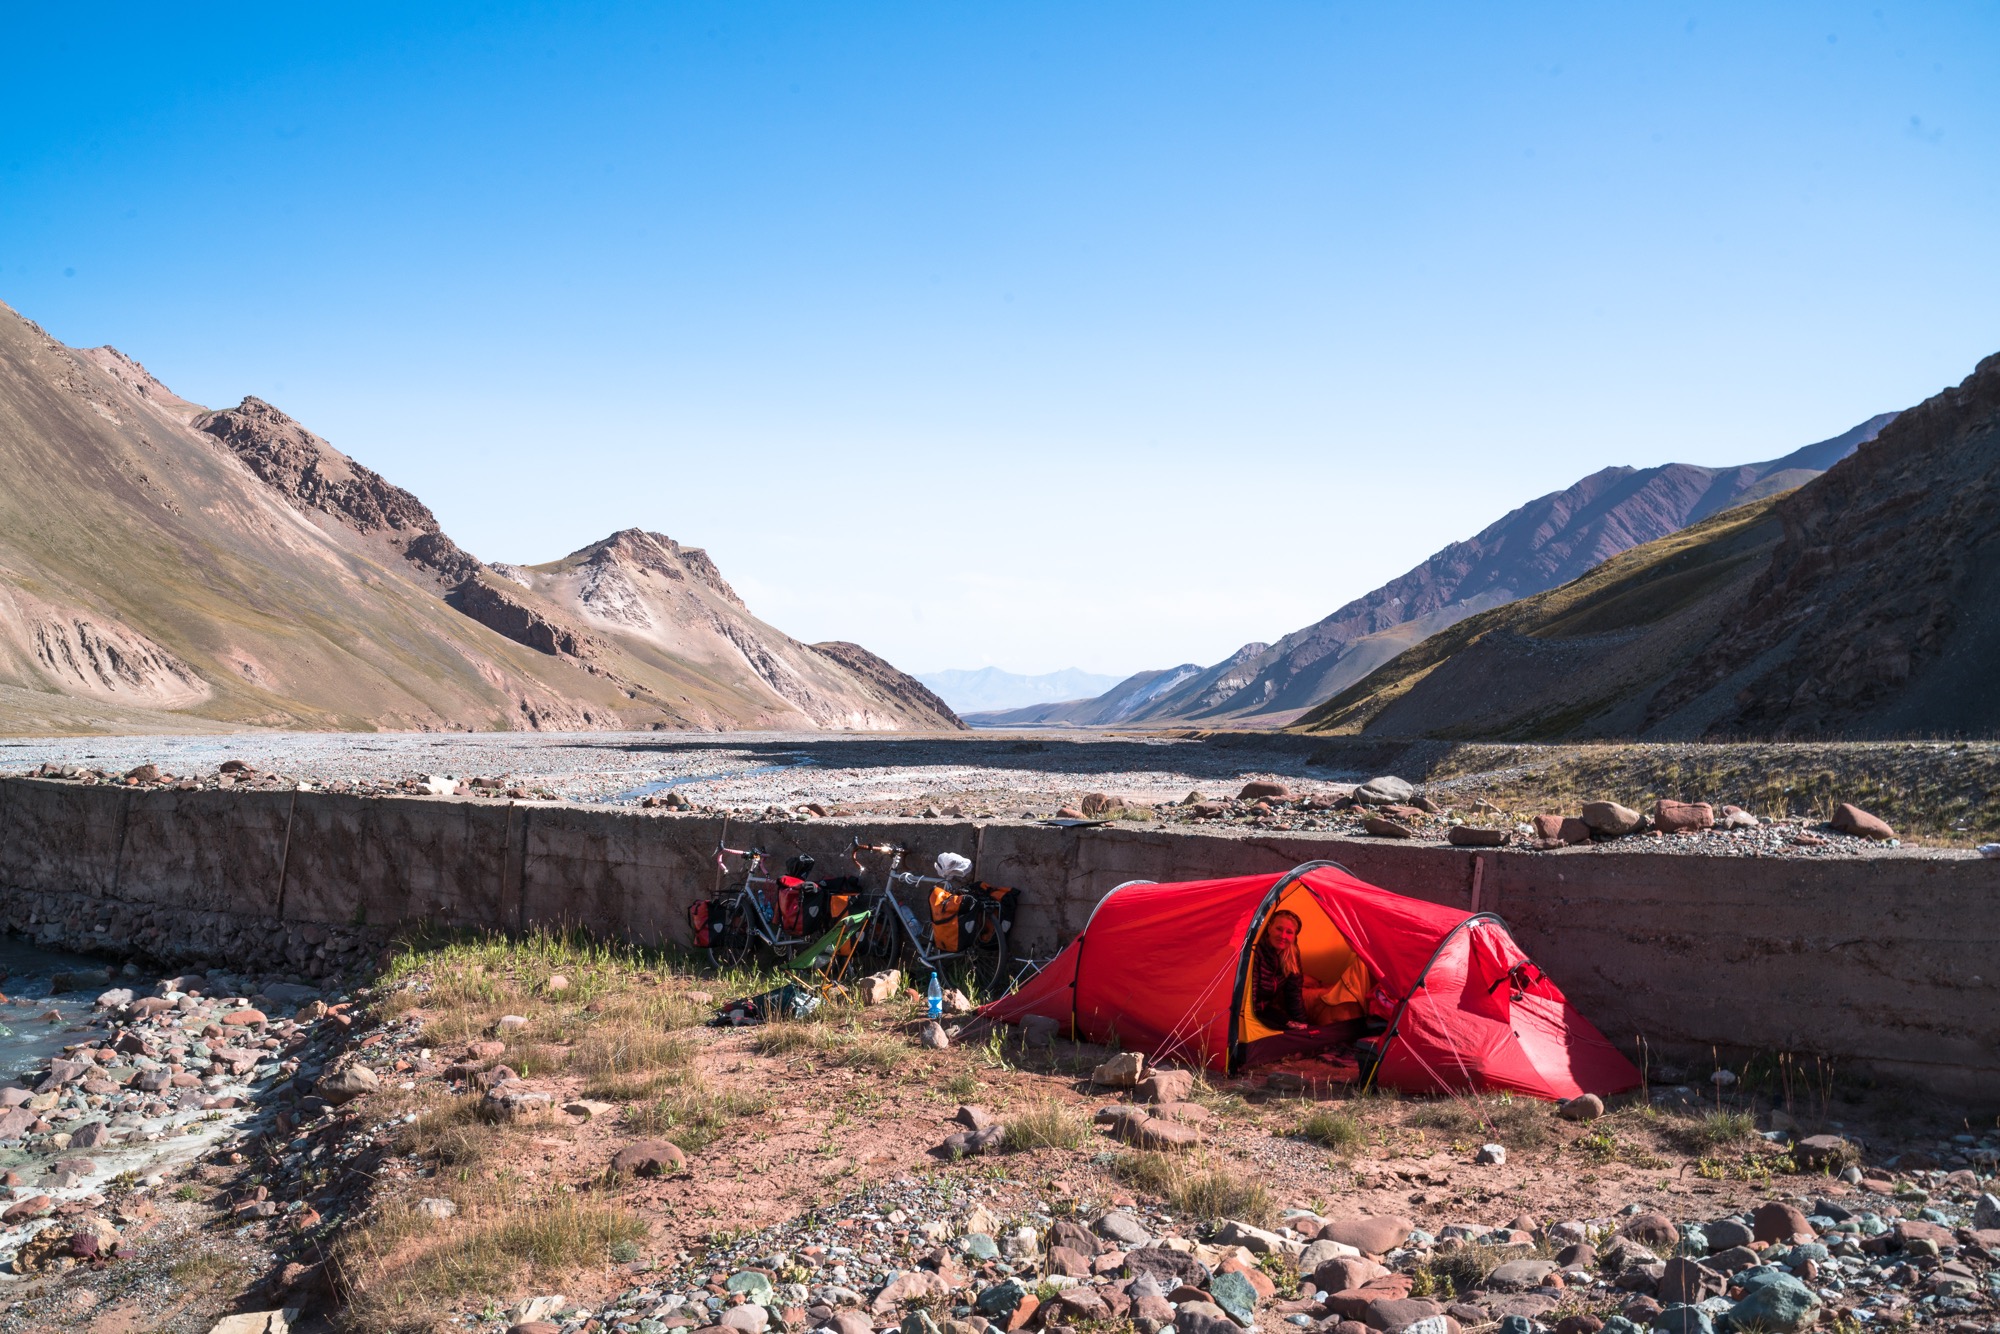 Camping in the 'no mans land' between Kyrgyzstan and Tajikistan